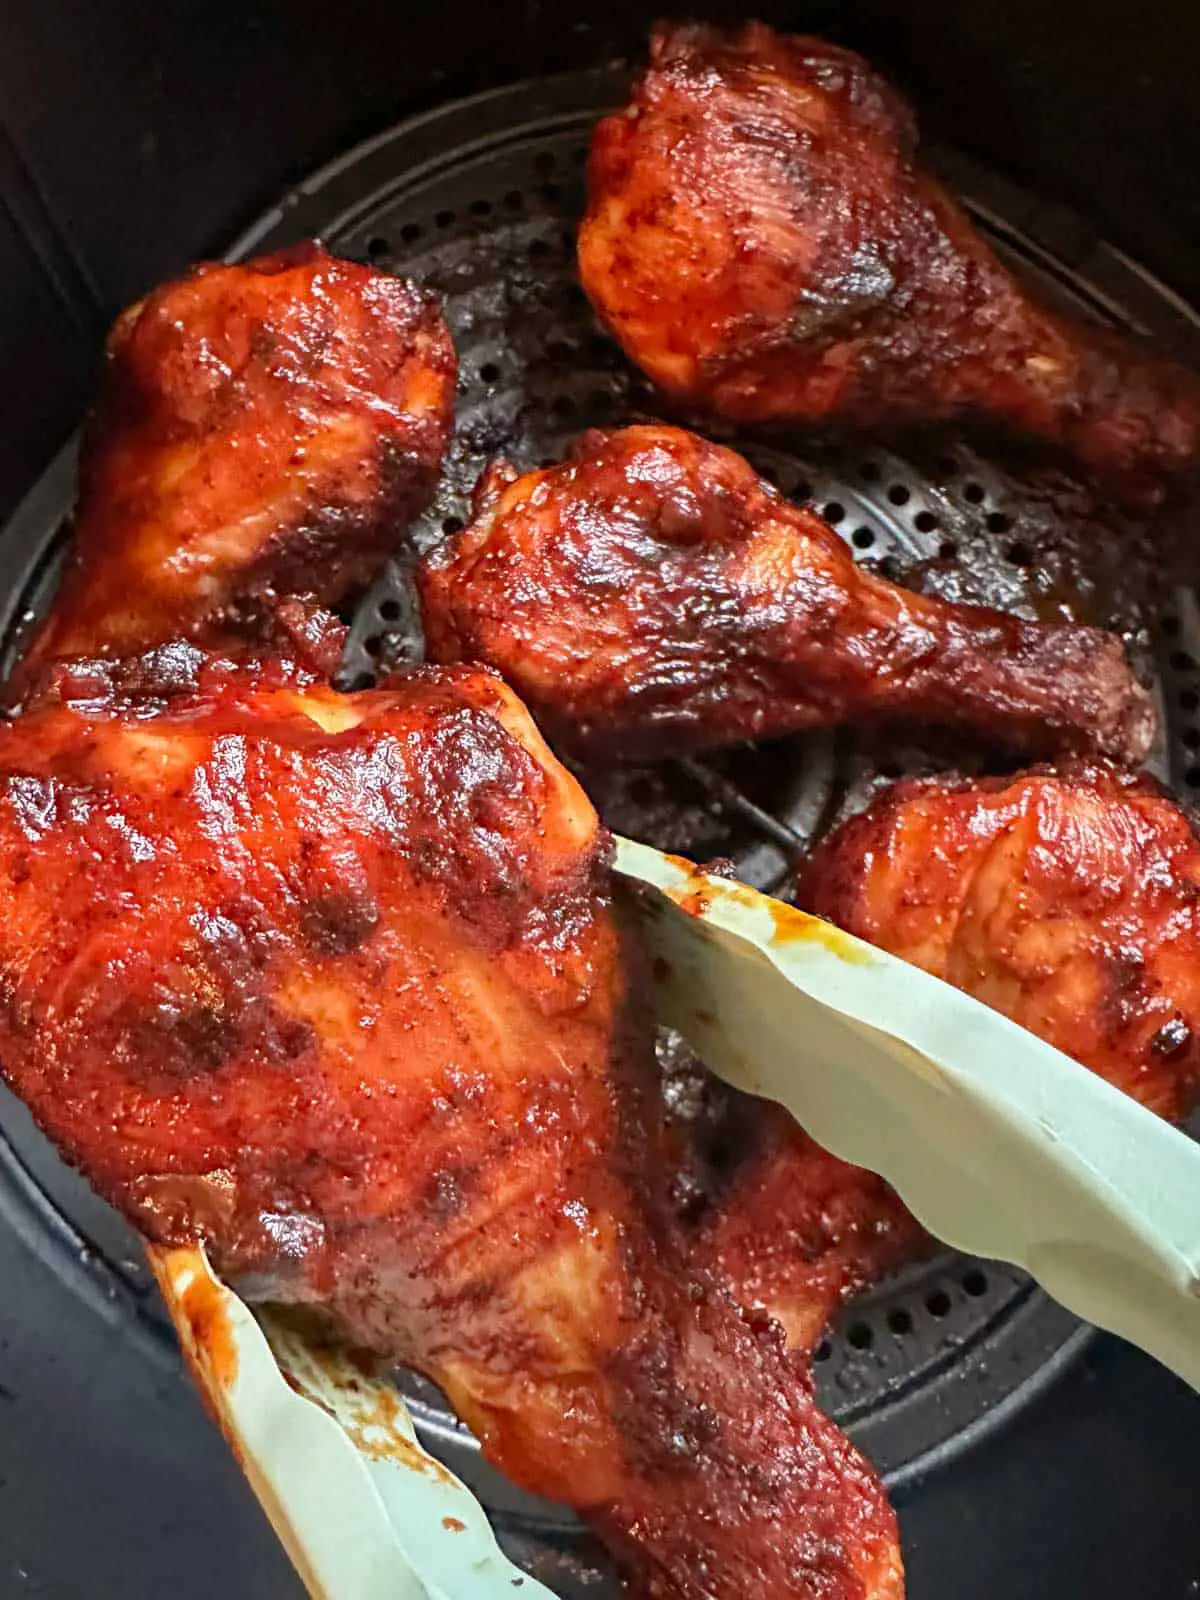 4 bbq chicken drumsticks in an air fryer basket with one being held by blue tongs in the foreground.